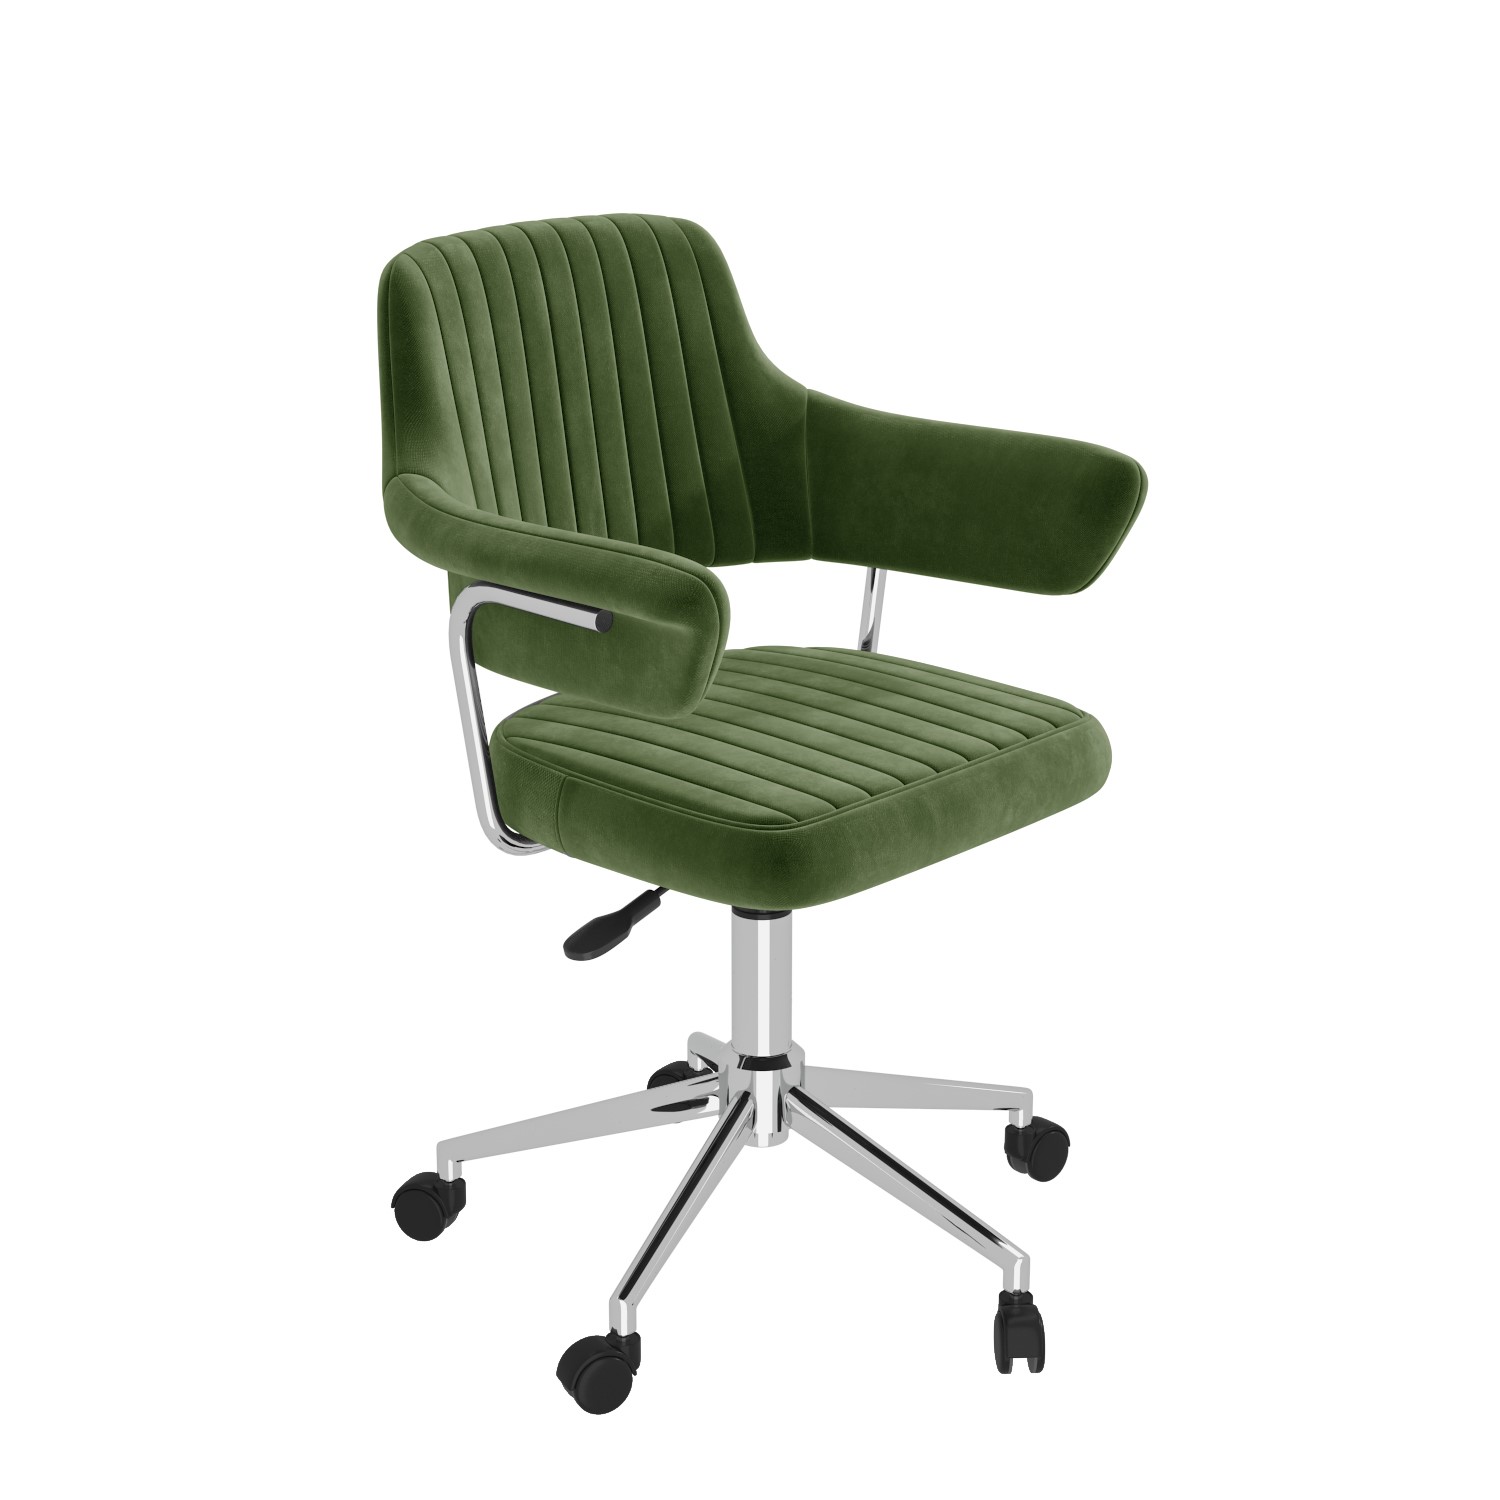 Photo of Olive green velvet swivel office chair with arms - fenix